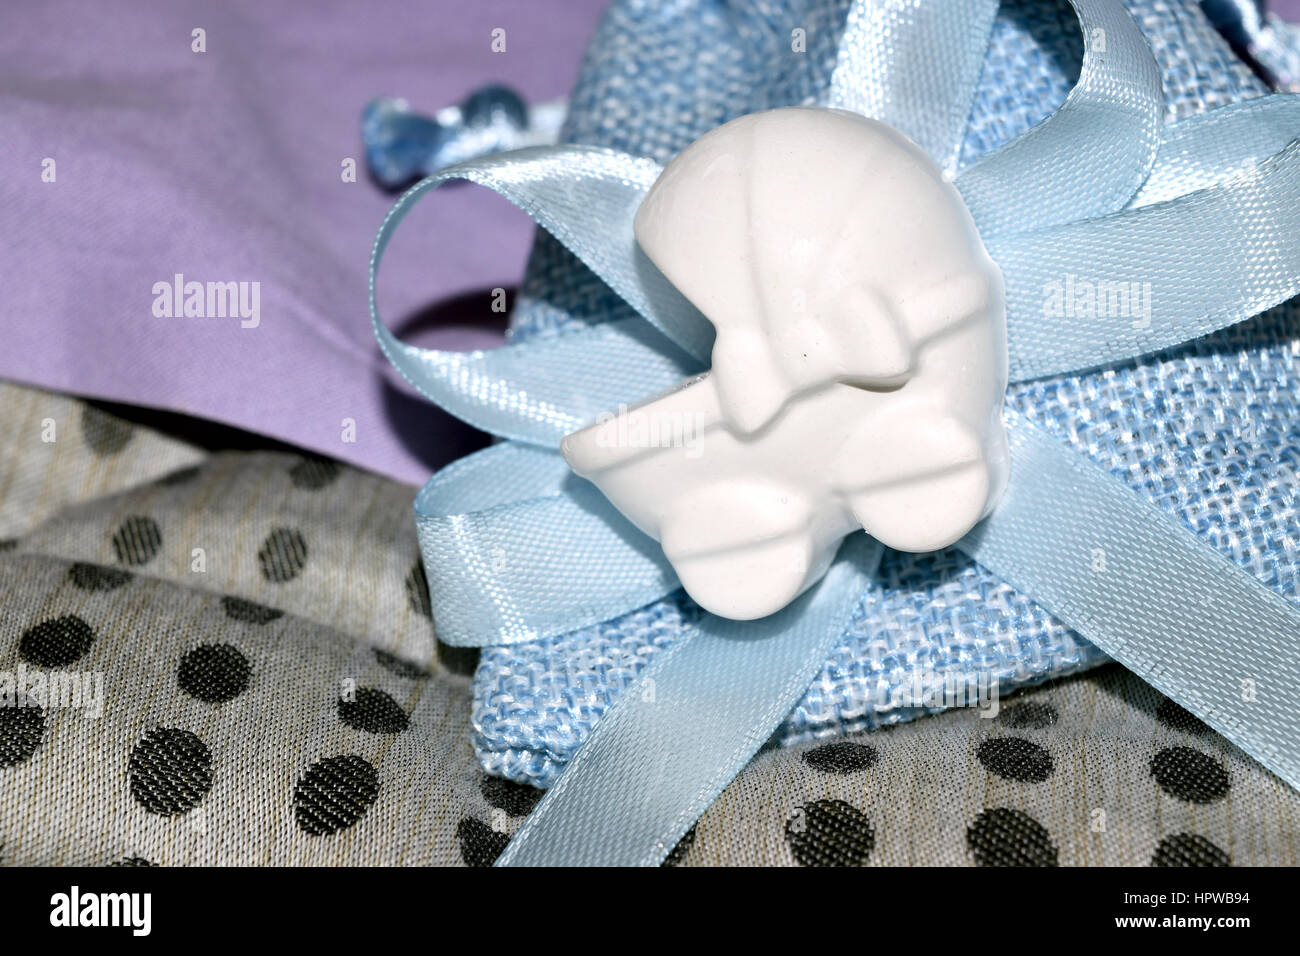 blue bag with confetti and decoration of a cradle shape Stock Photo